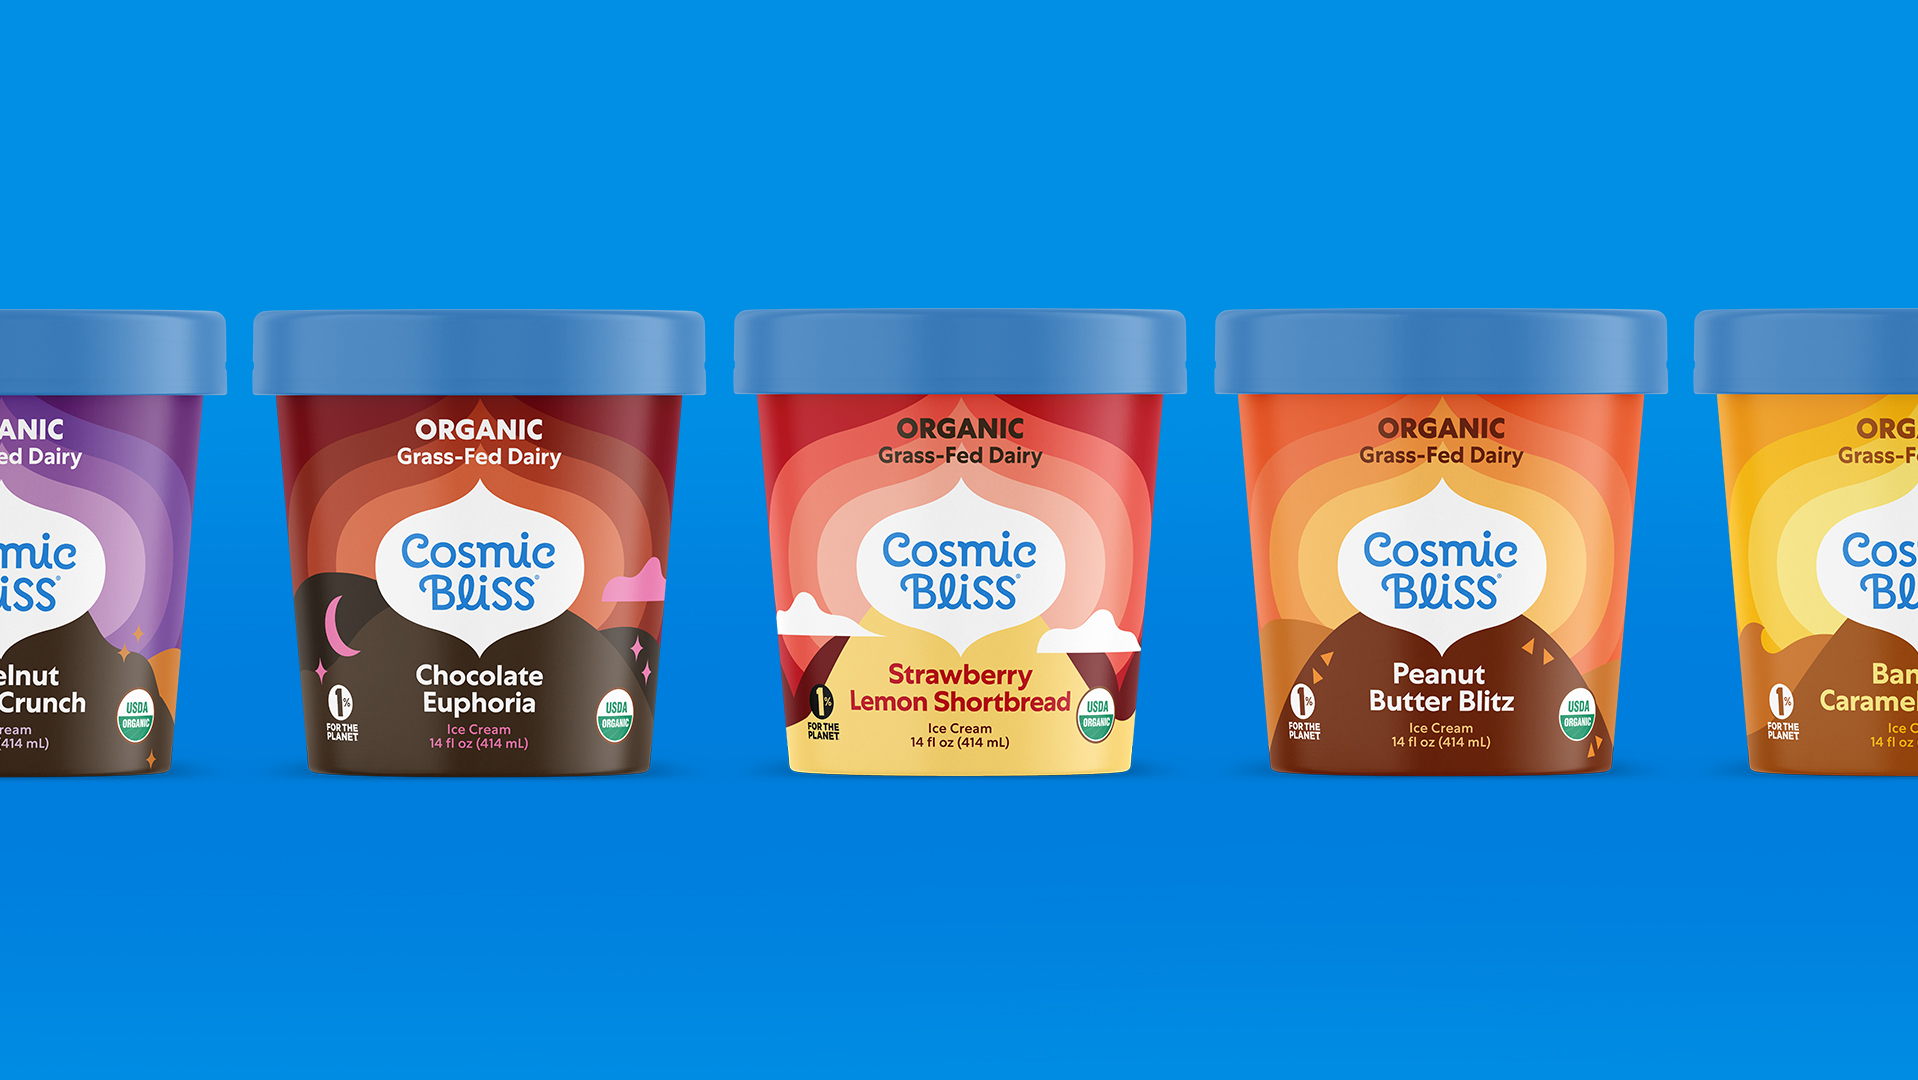 Cosmic Bliss’s New Identity Is Immaculately Seamless